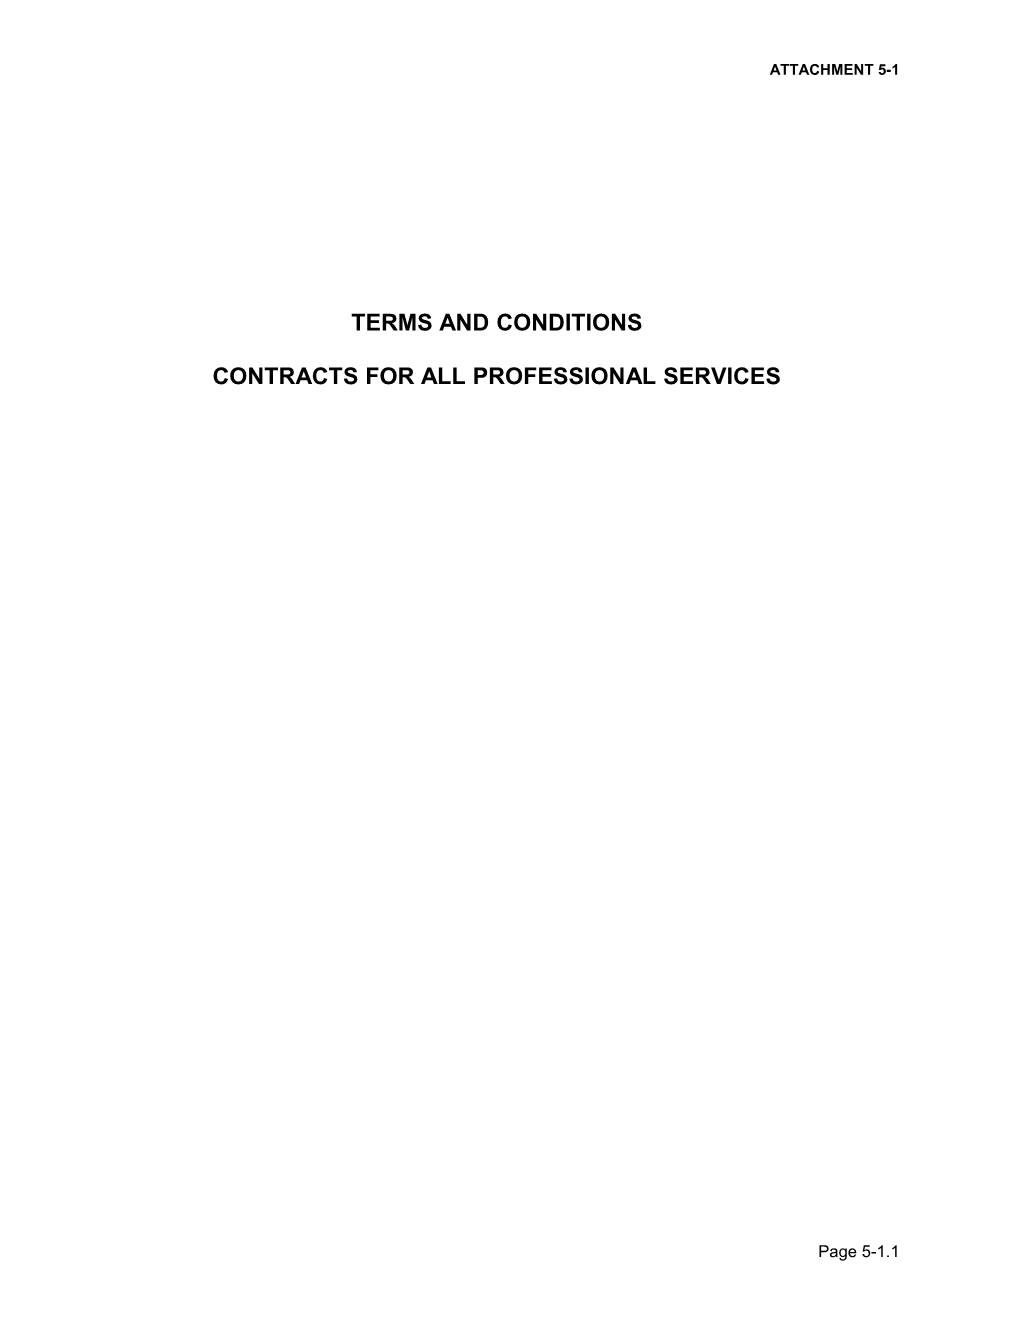 Contracts for All Professional Services